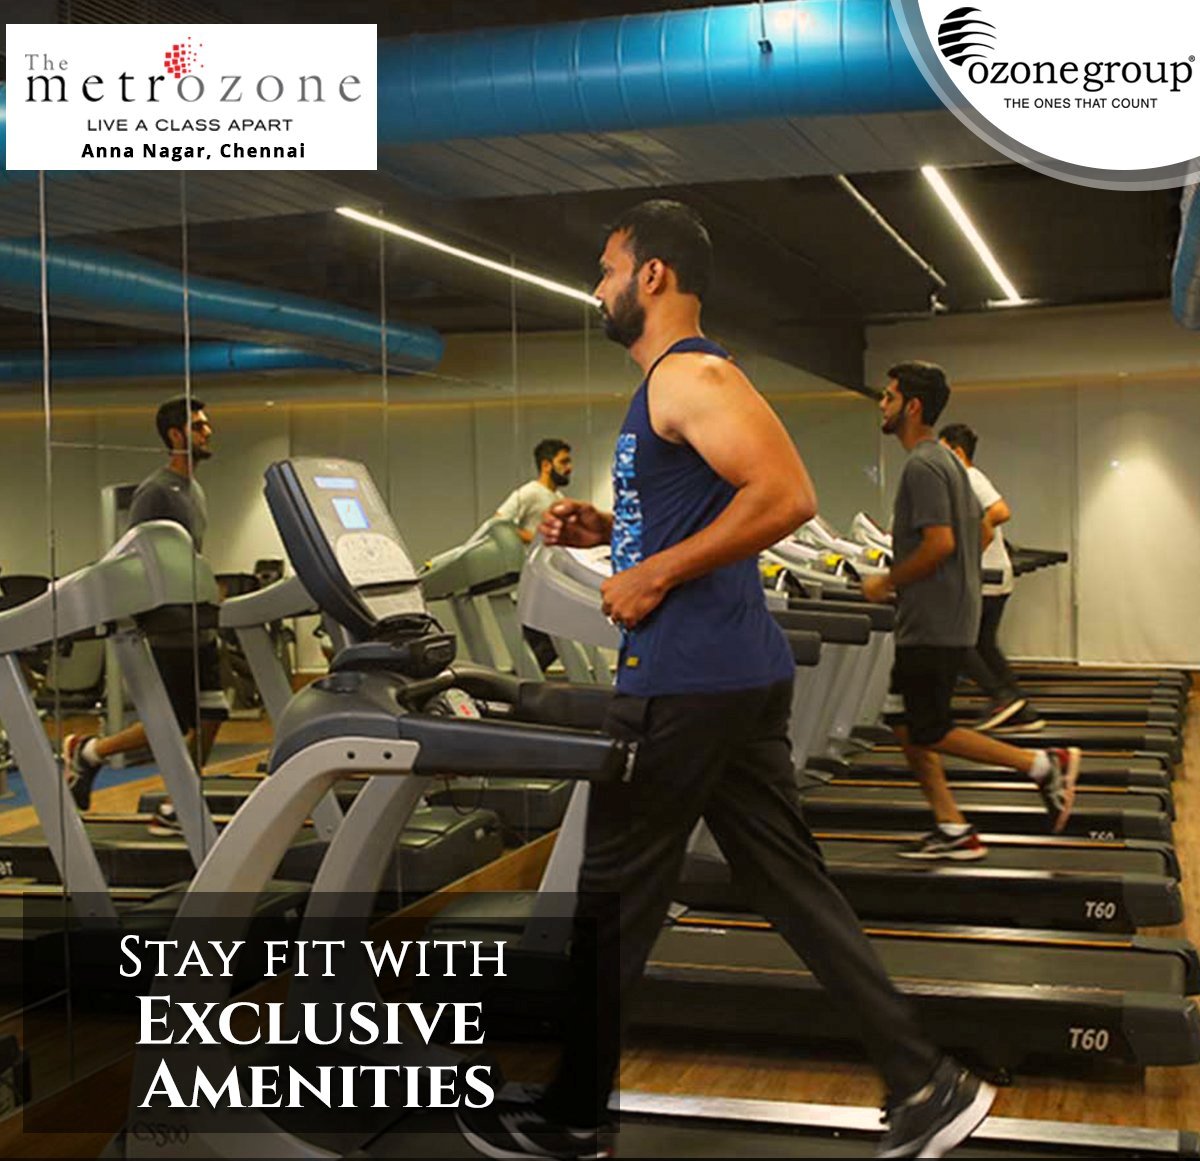 Stay fit and healthy at Ozone Metrozone with all your Health and Fitness needs taken care of